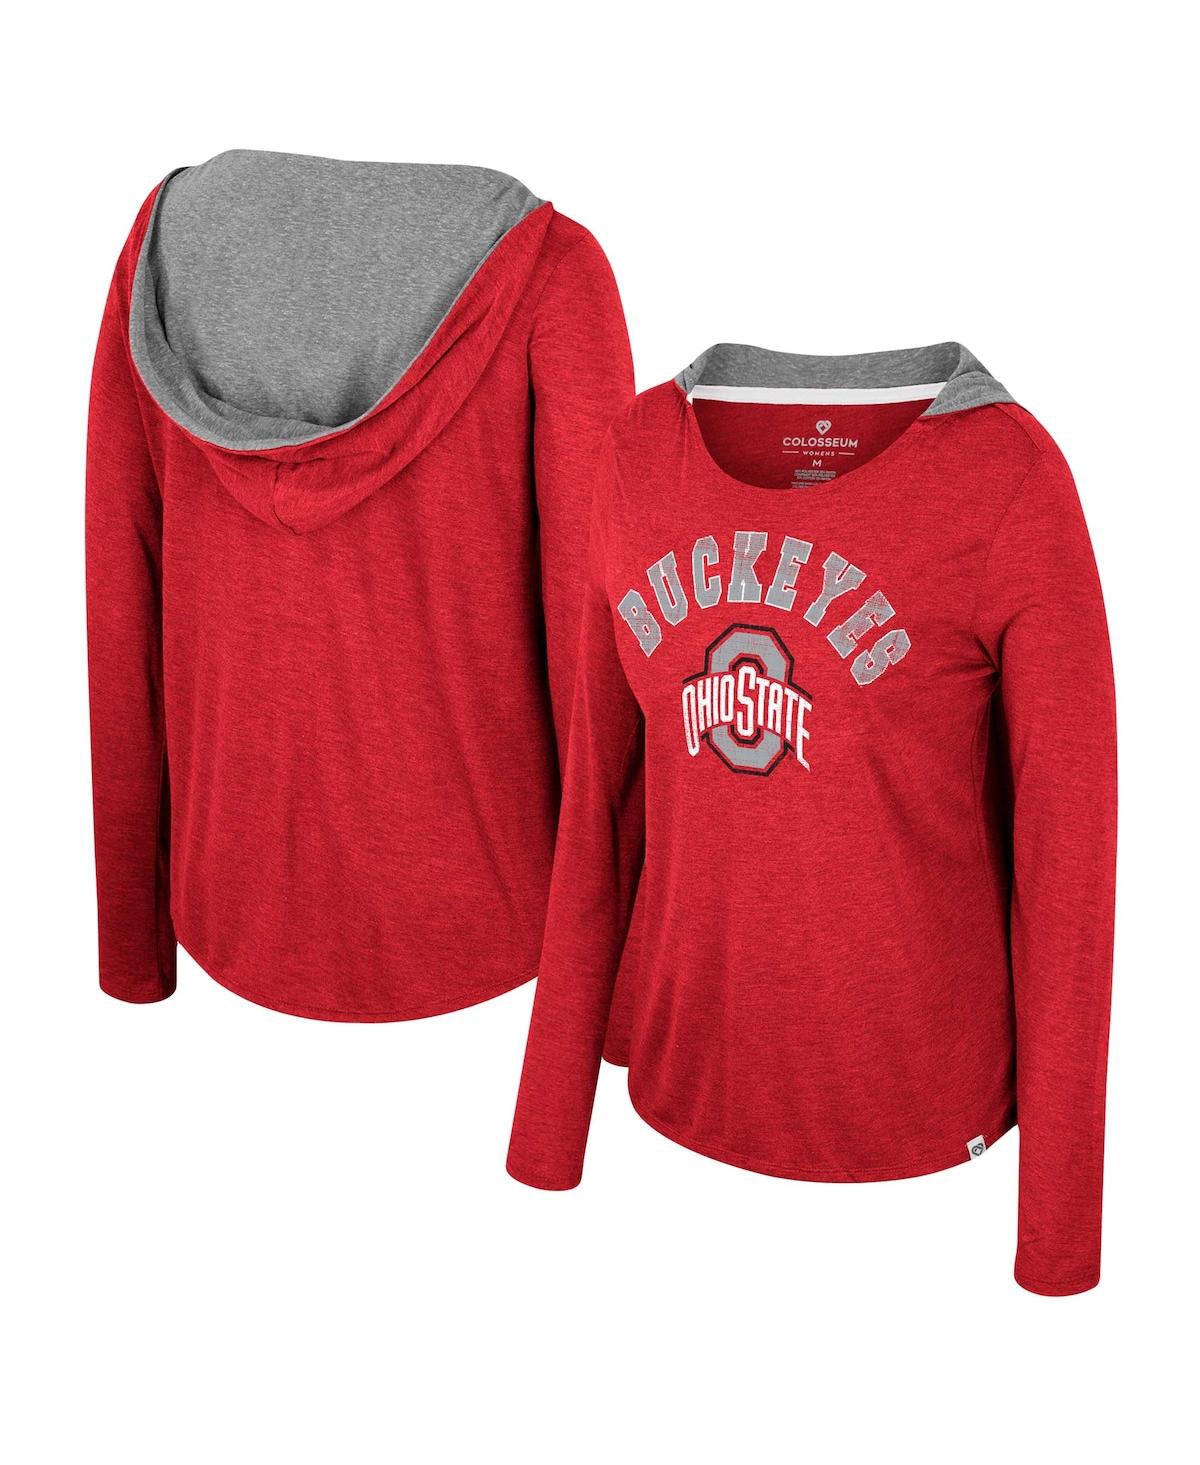 Women's Colosseum Gray Illinois Fighting Illini Distressed Heather Long Sleeve Hoodie T-Shirt - Scarlet